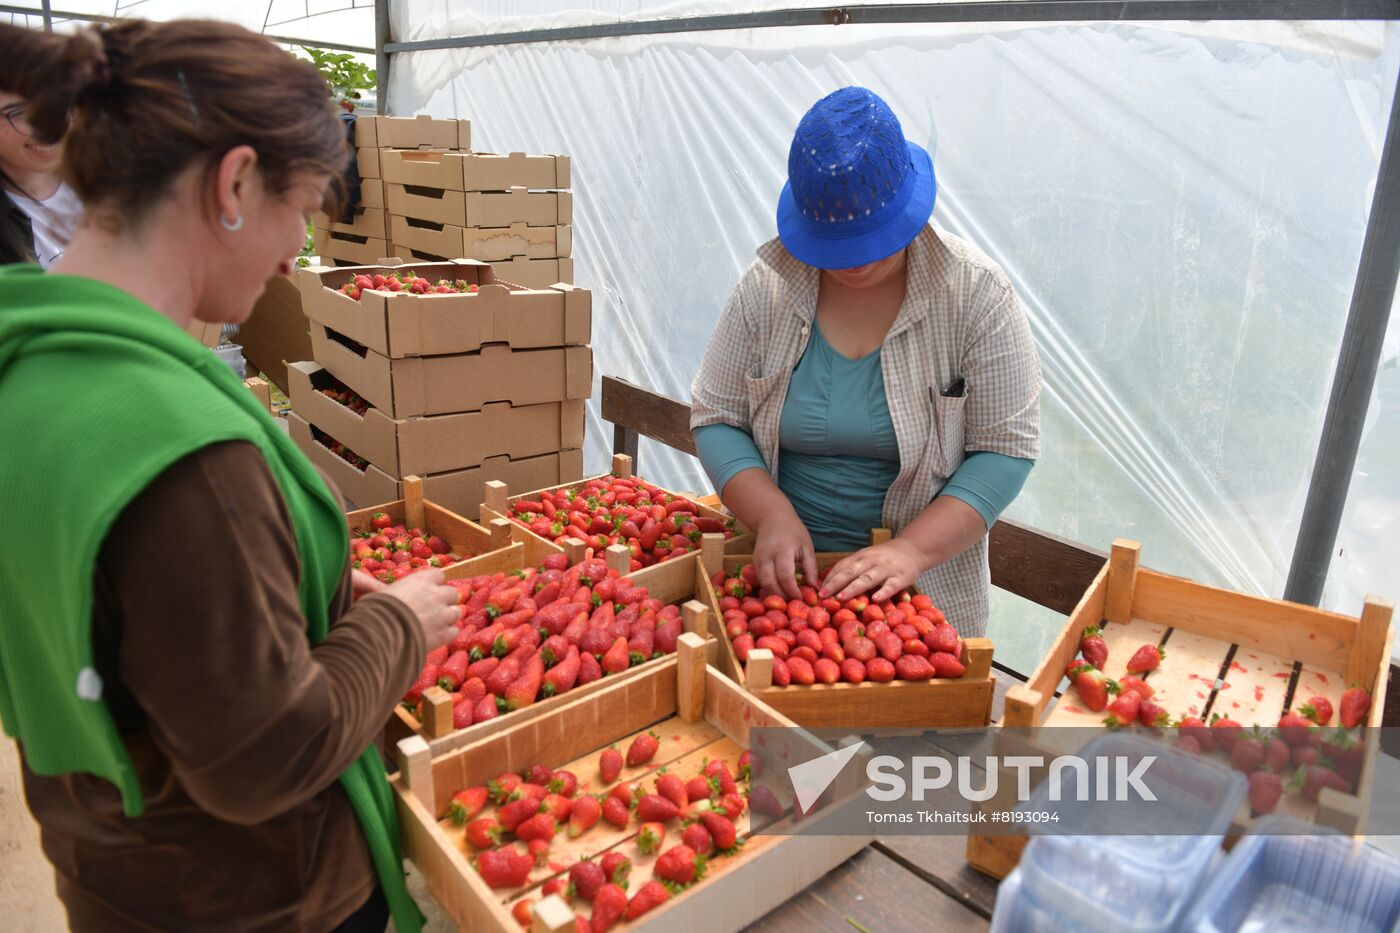 Abkhazia Agriculture Strawberry Harvest